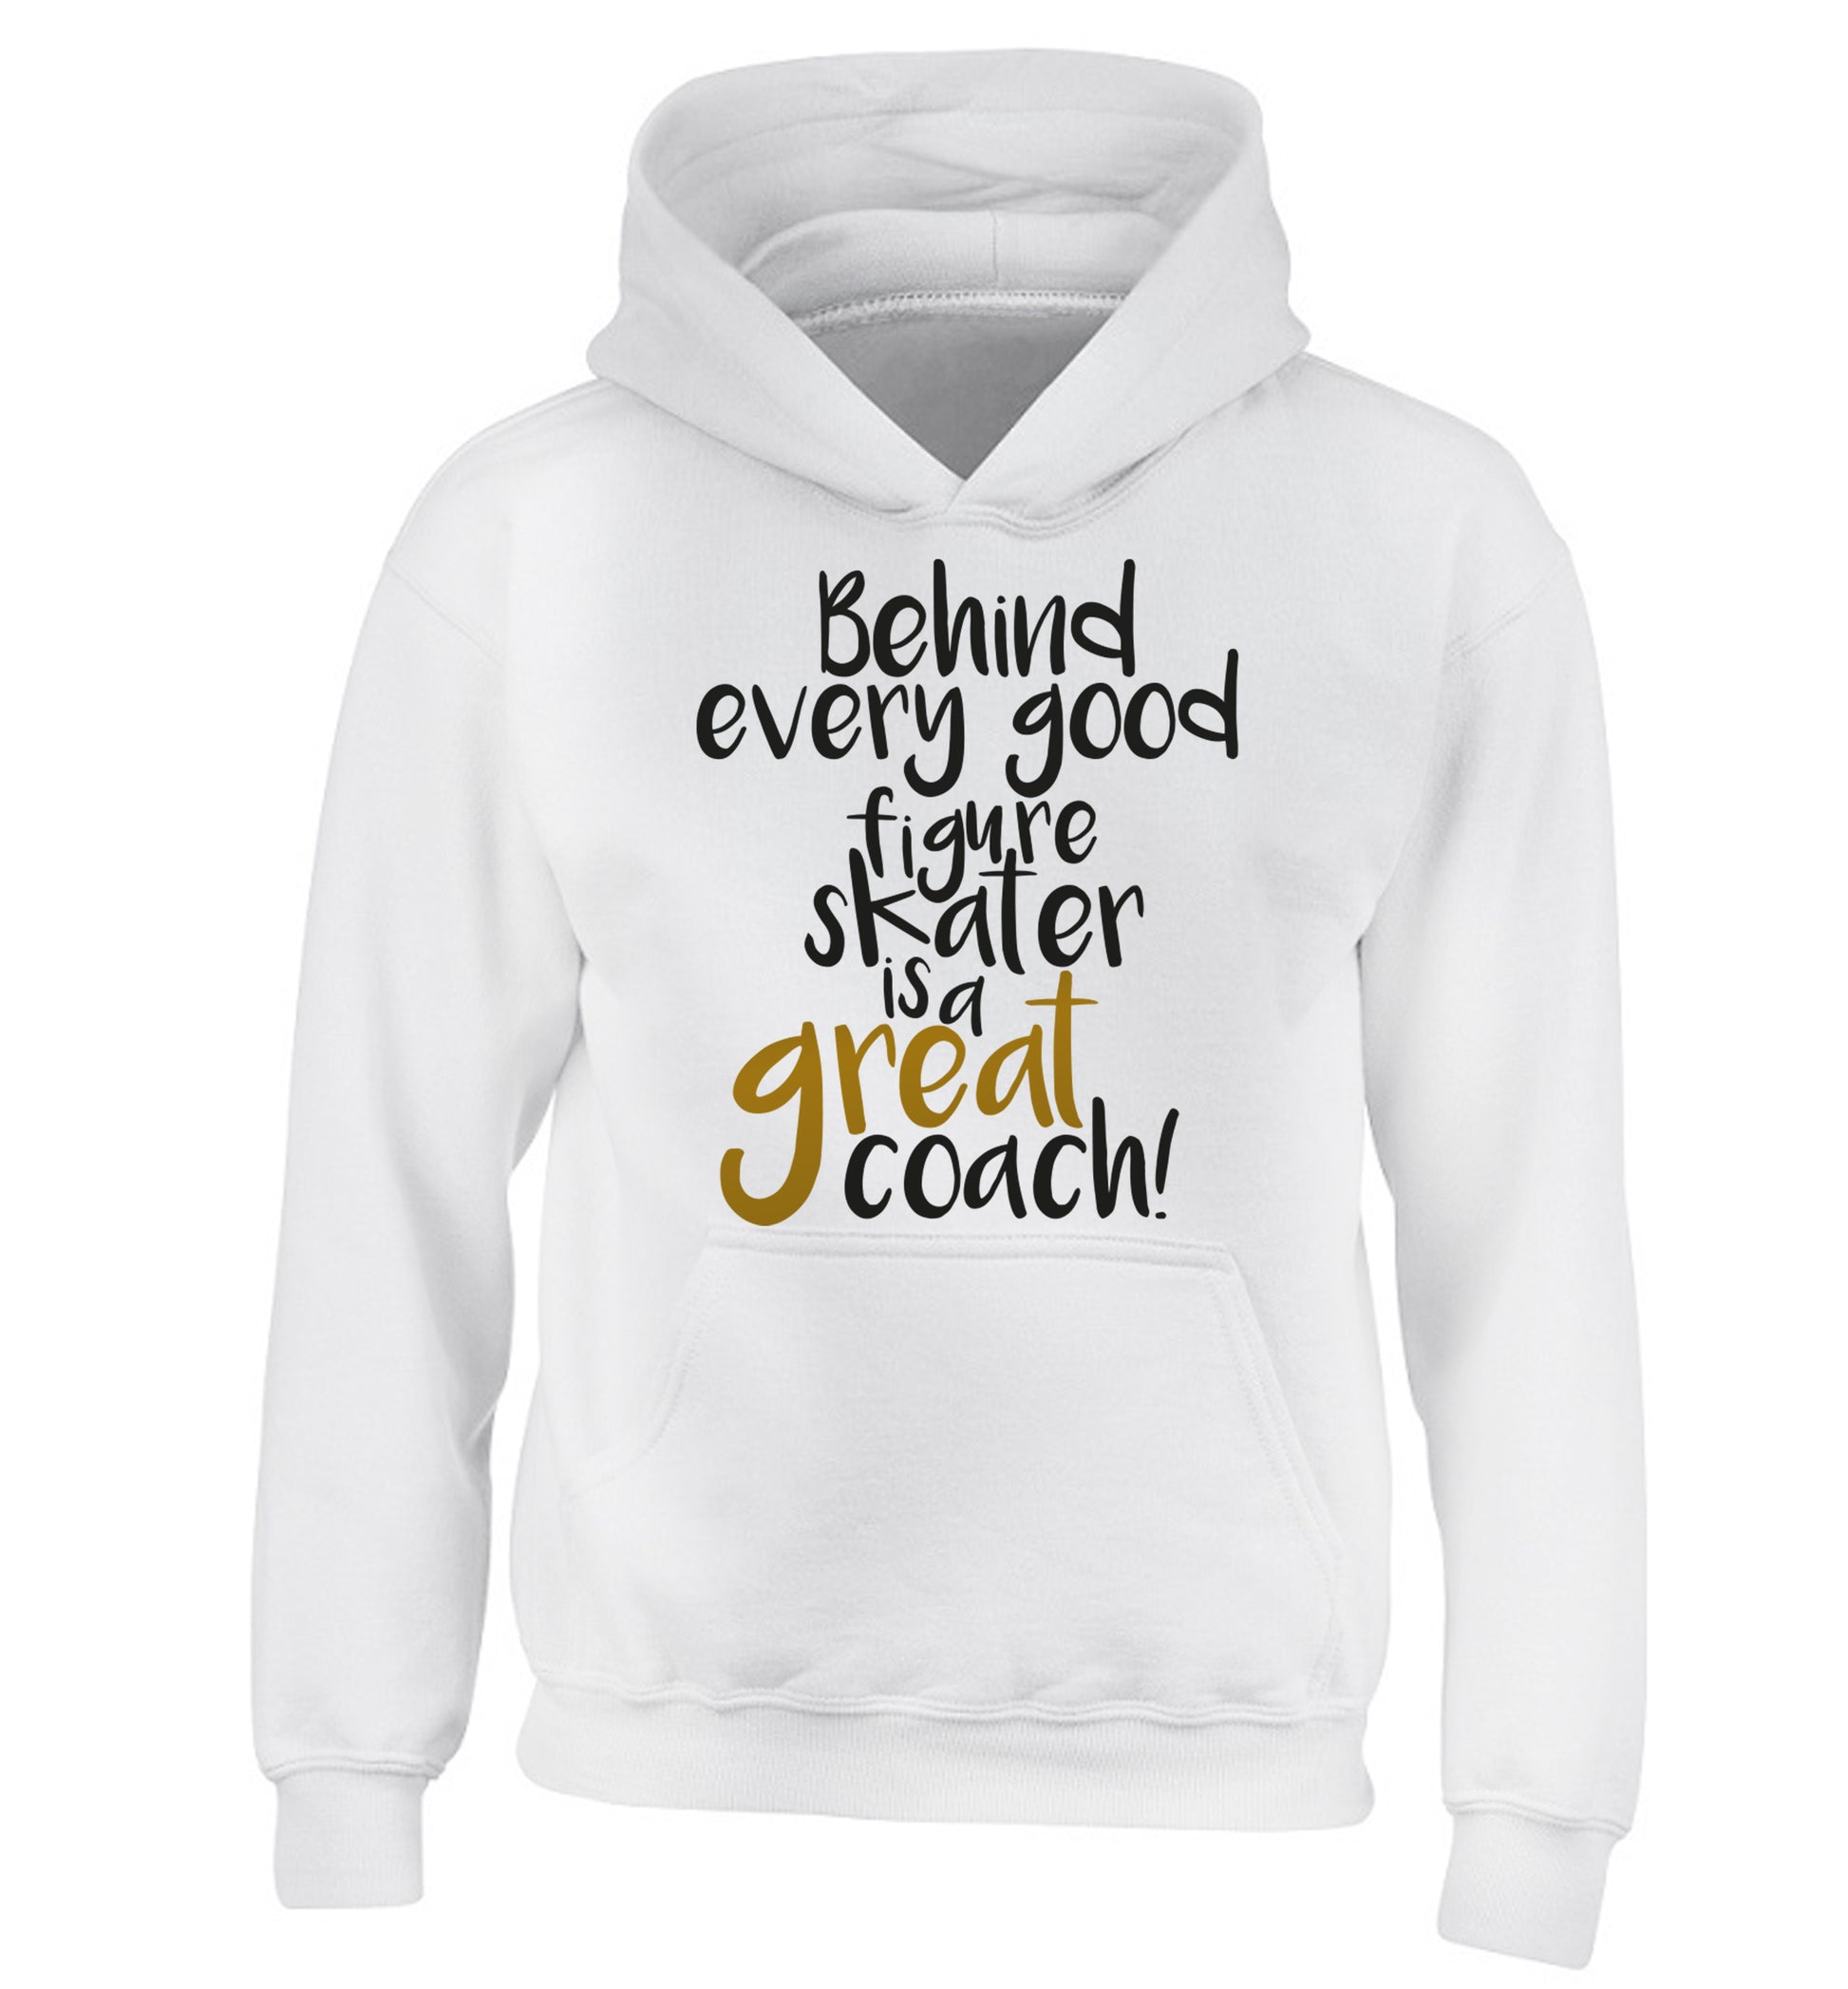 Behind every good figure skater is a great coach children's white hoodie 12-14 Years